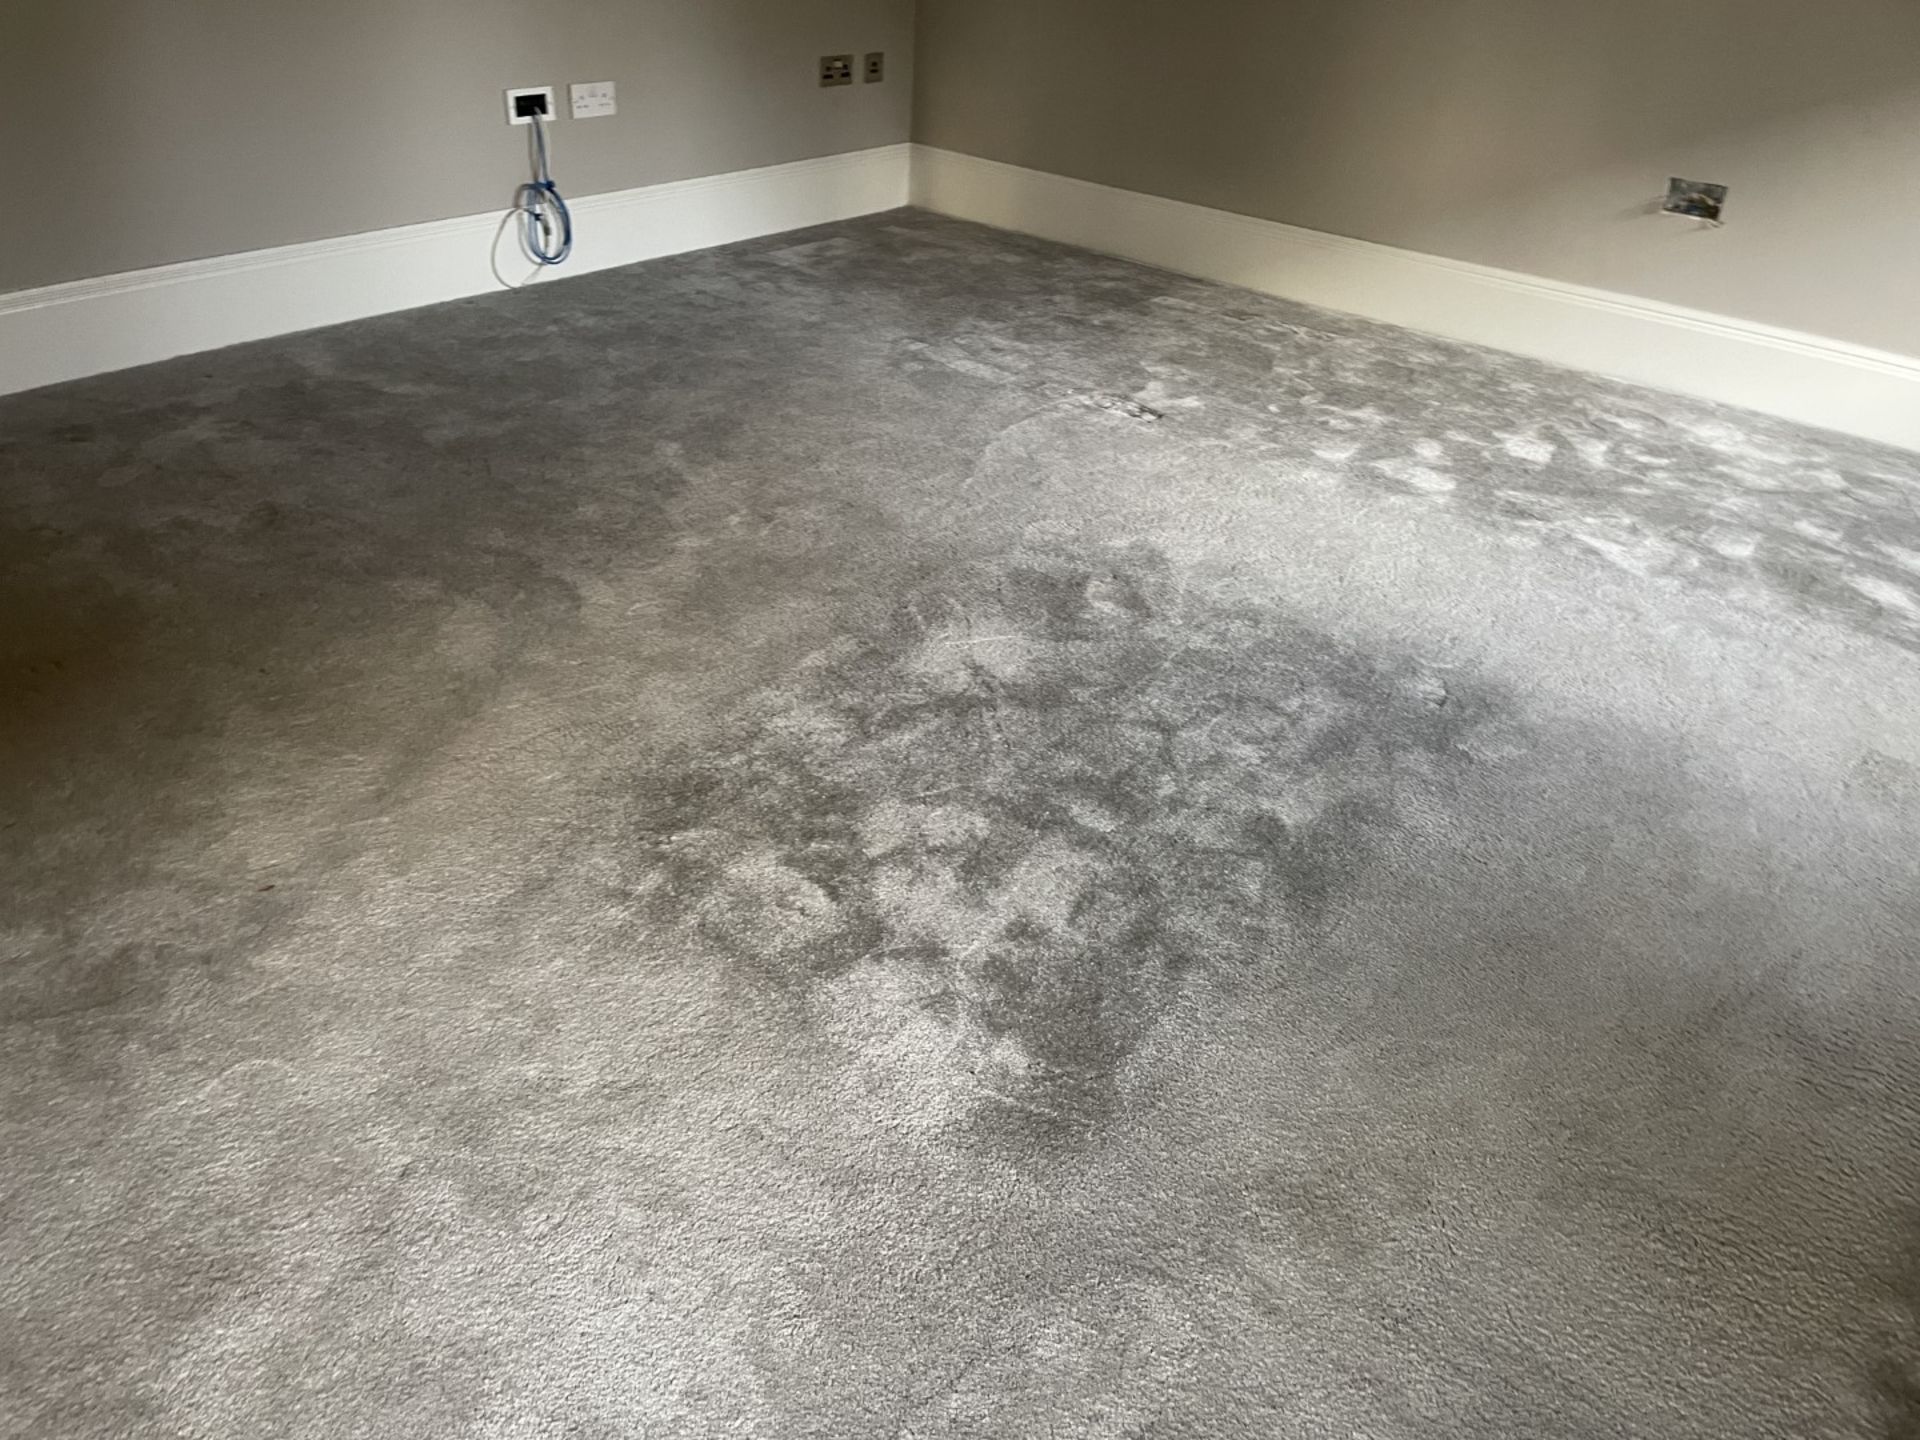 1 x Luxury Wool Downstairs Carpet in a Neutral Tone + Premium Underlay - Ref: PAN211 - CL896 - NO - Image 5 of 20